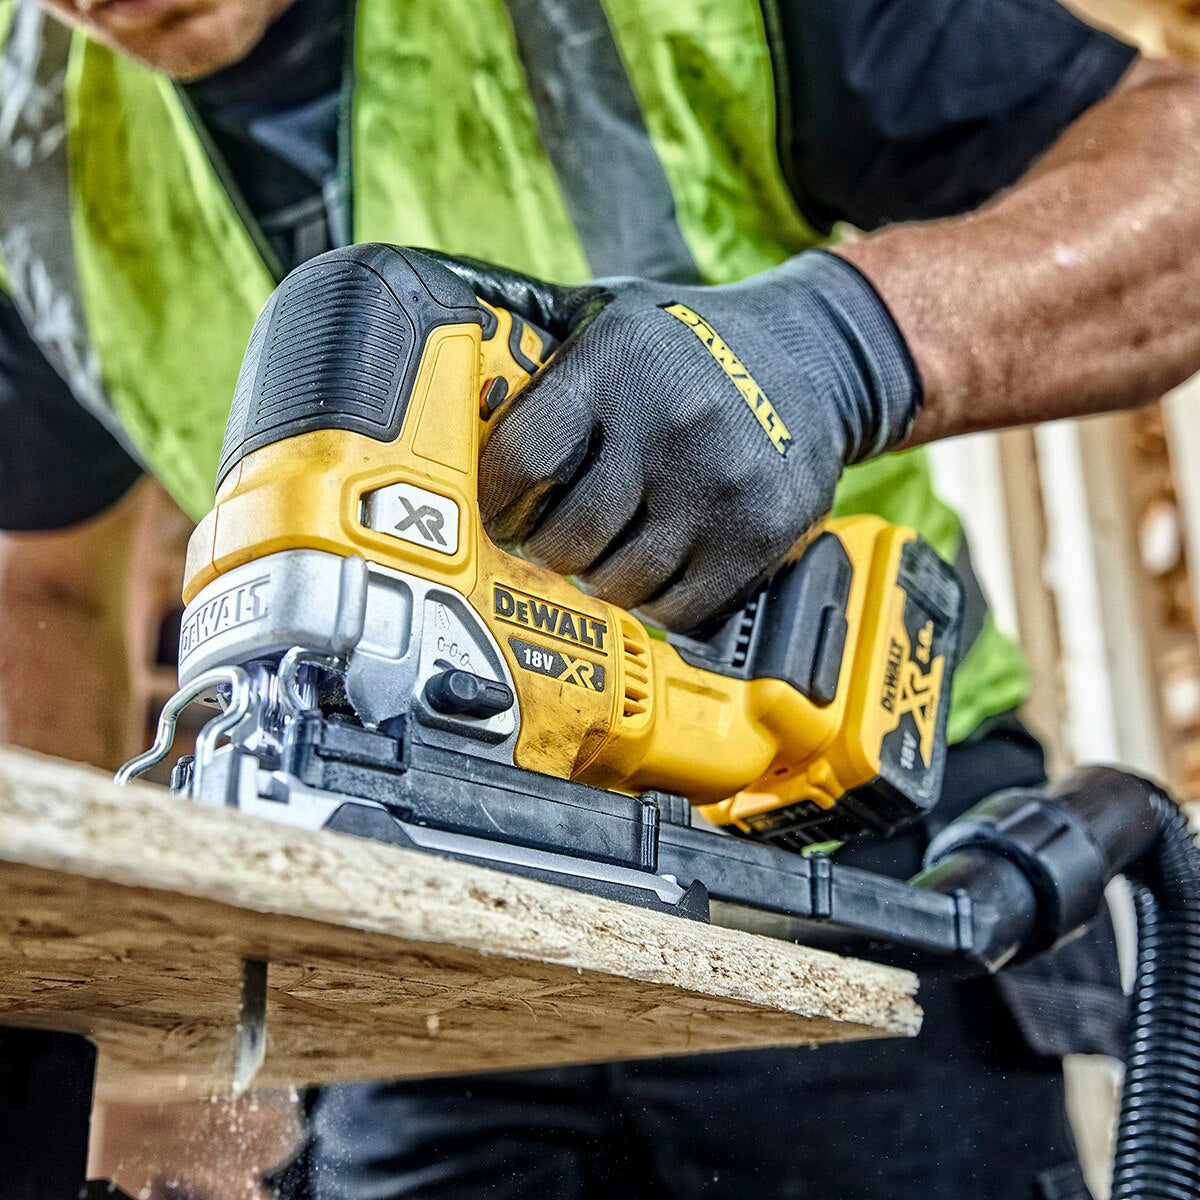 Dewalt DEWKIT90 18V Cordless 8 Piece Kit with 4 x 5.0Ah Batteries & Charger in TSTAK